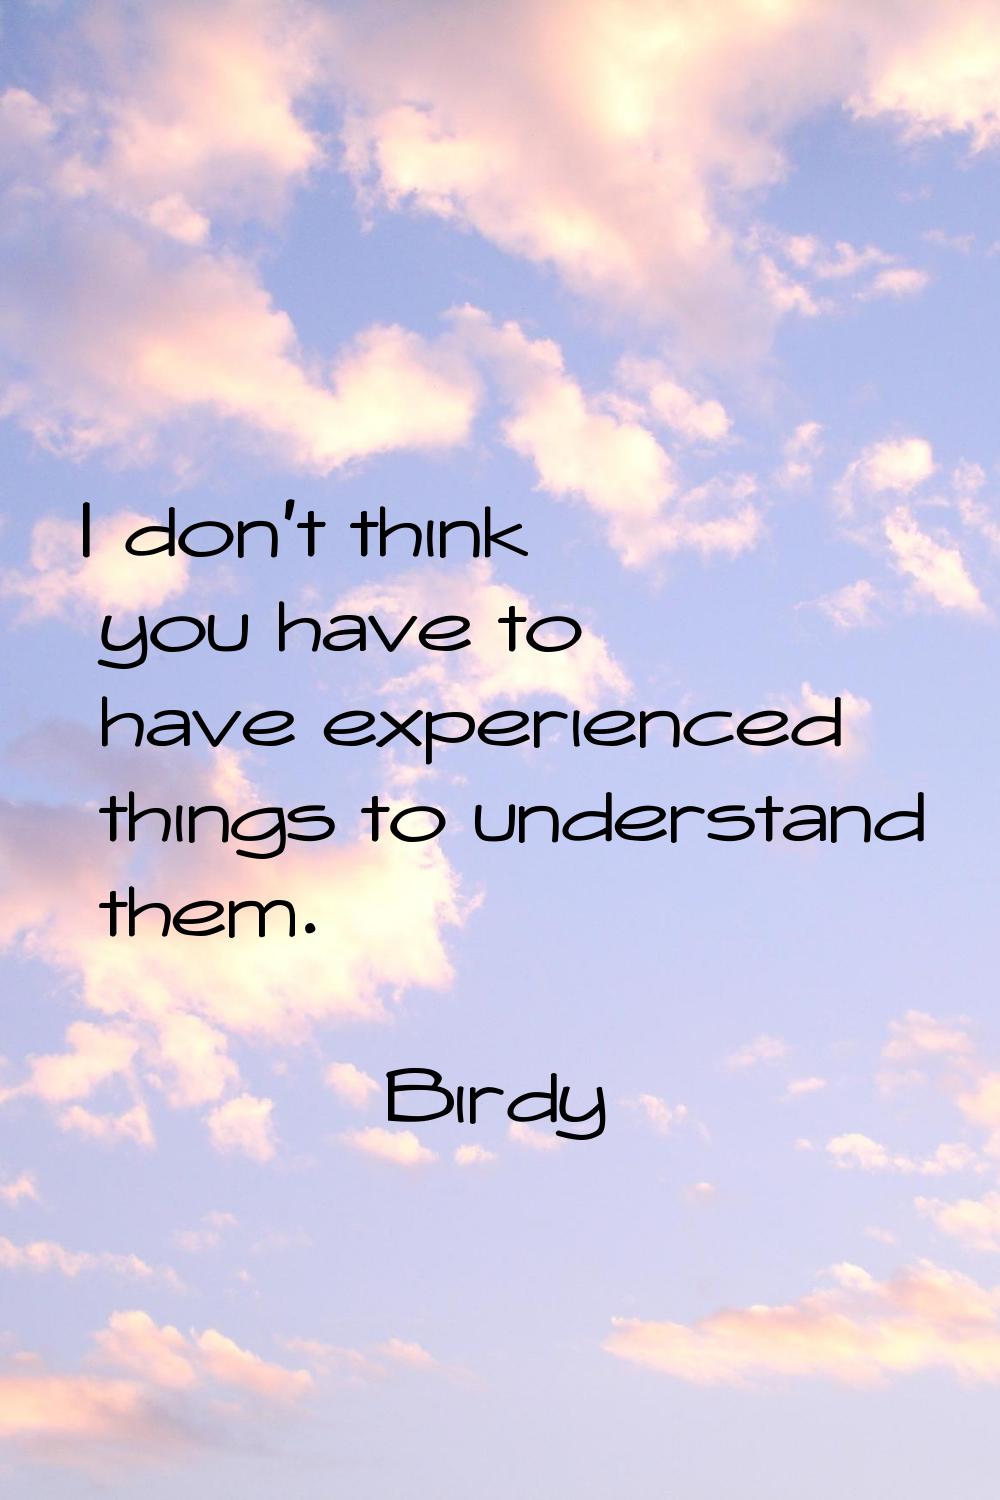 I don't think you have to have experienced things to understand them.